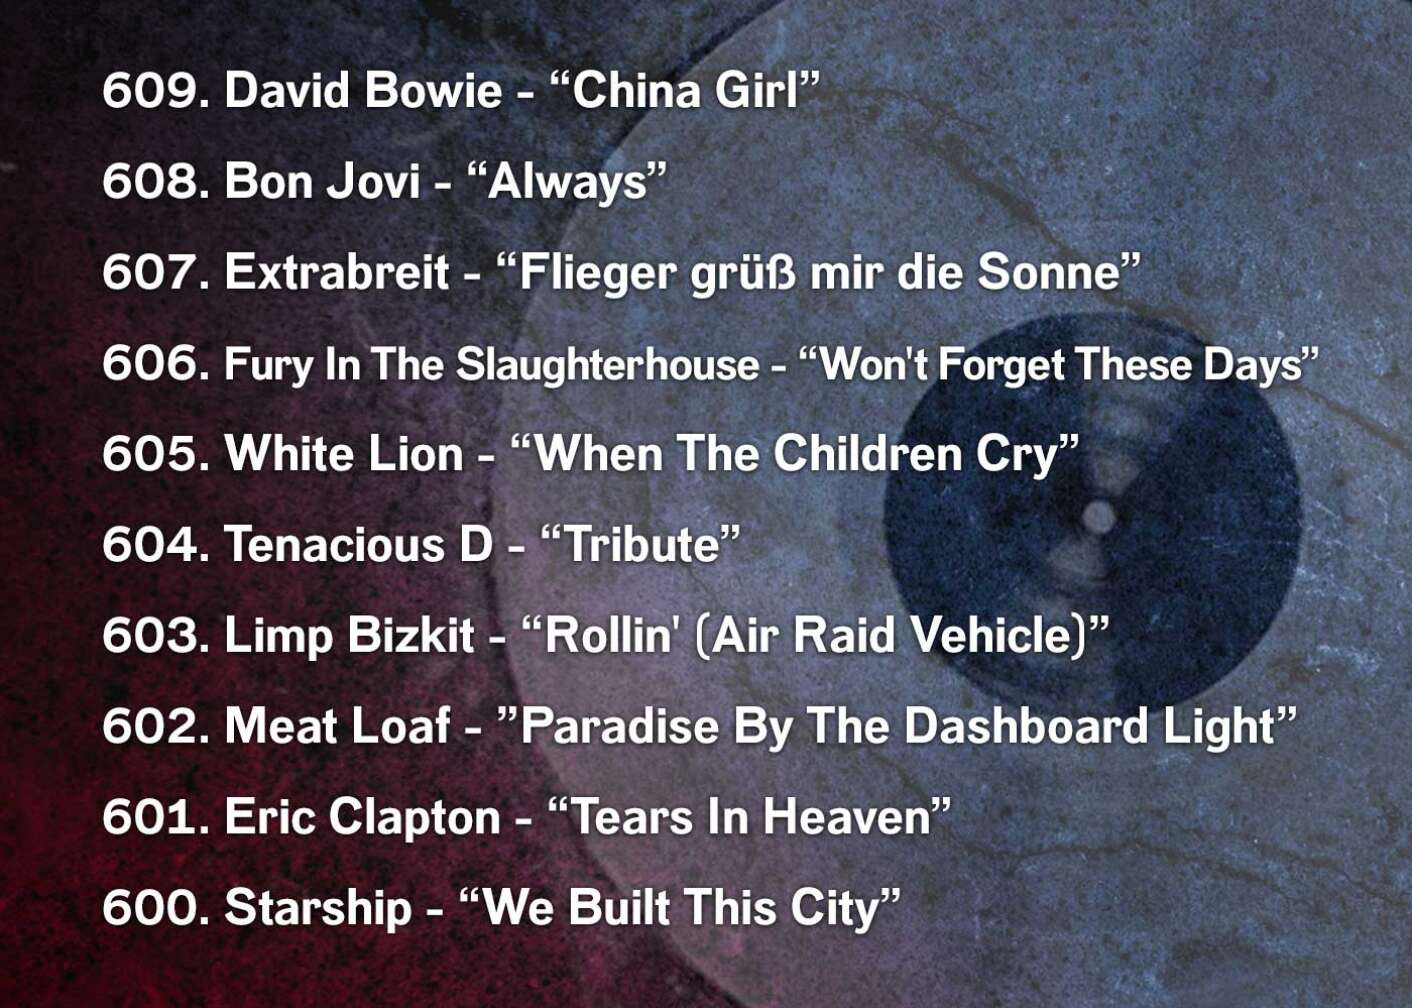 609. David Bowie - “China Girl” 608. Bon Jovi - “Always” 607. Extrabreit - “Flieger grüß mir die Sonne” 606. Fury In The Slaughterhouse - “Won't Forget These Days” 605. White Lion - “When The Children Cry” 604. Tenacious D - “Tribute” 603. Limp Bizkit - “Rollin' (Air Raid Vehicle)” 602. Meat Loaf - ”Paradise By The Dashboard Light” 601. Eric Clapton - “Tears In Heaven” 600. Starship - “We Built This City”